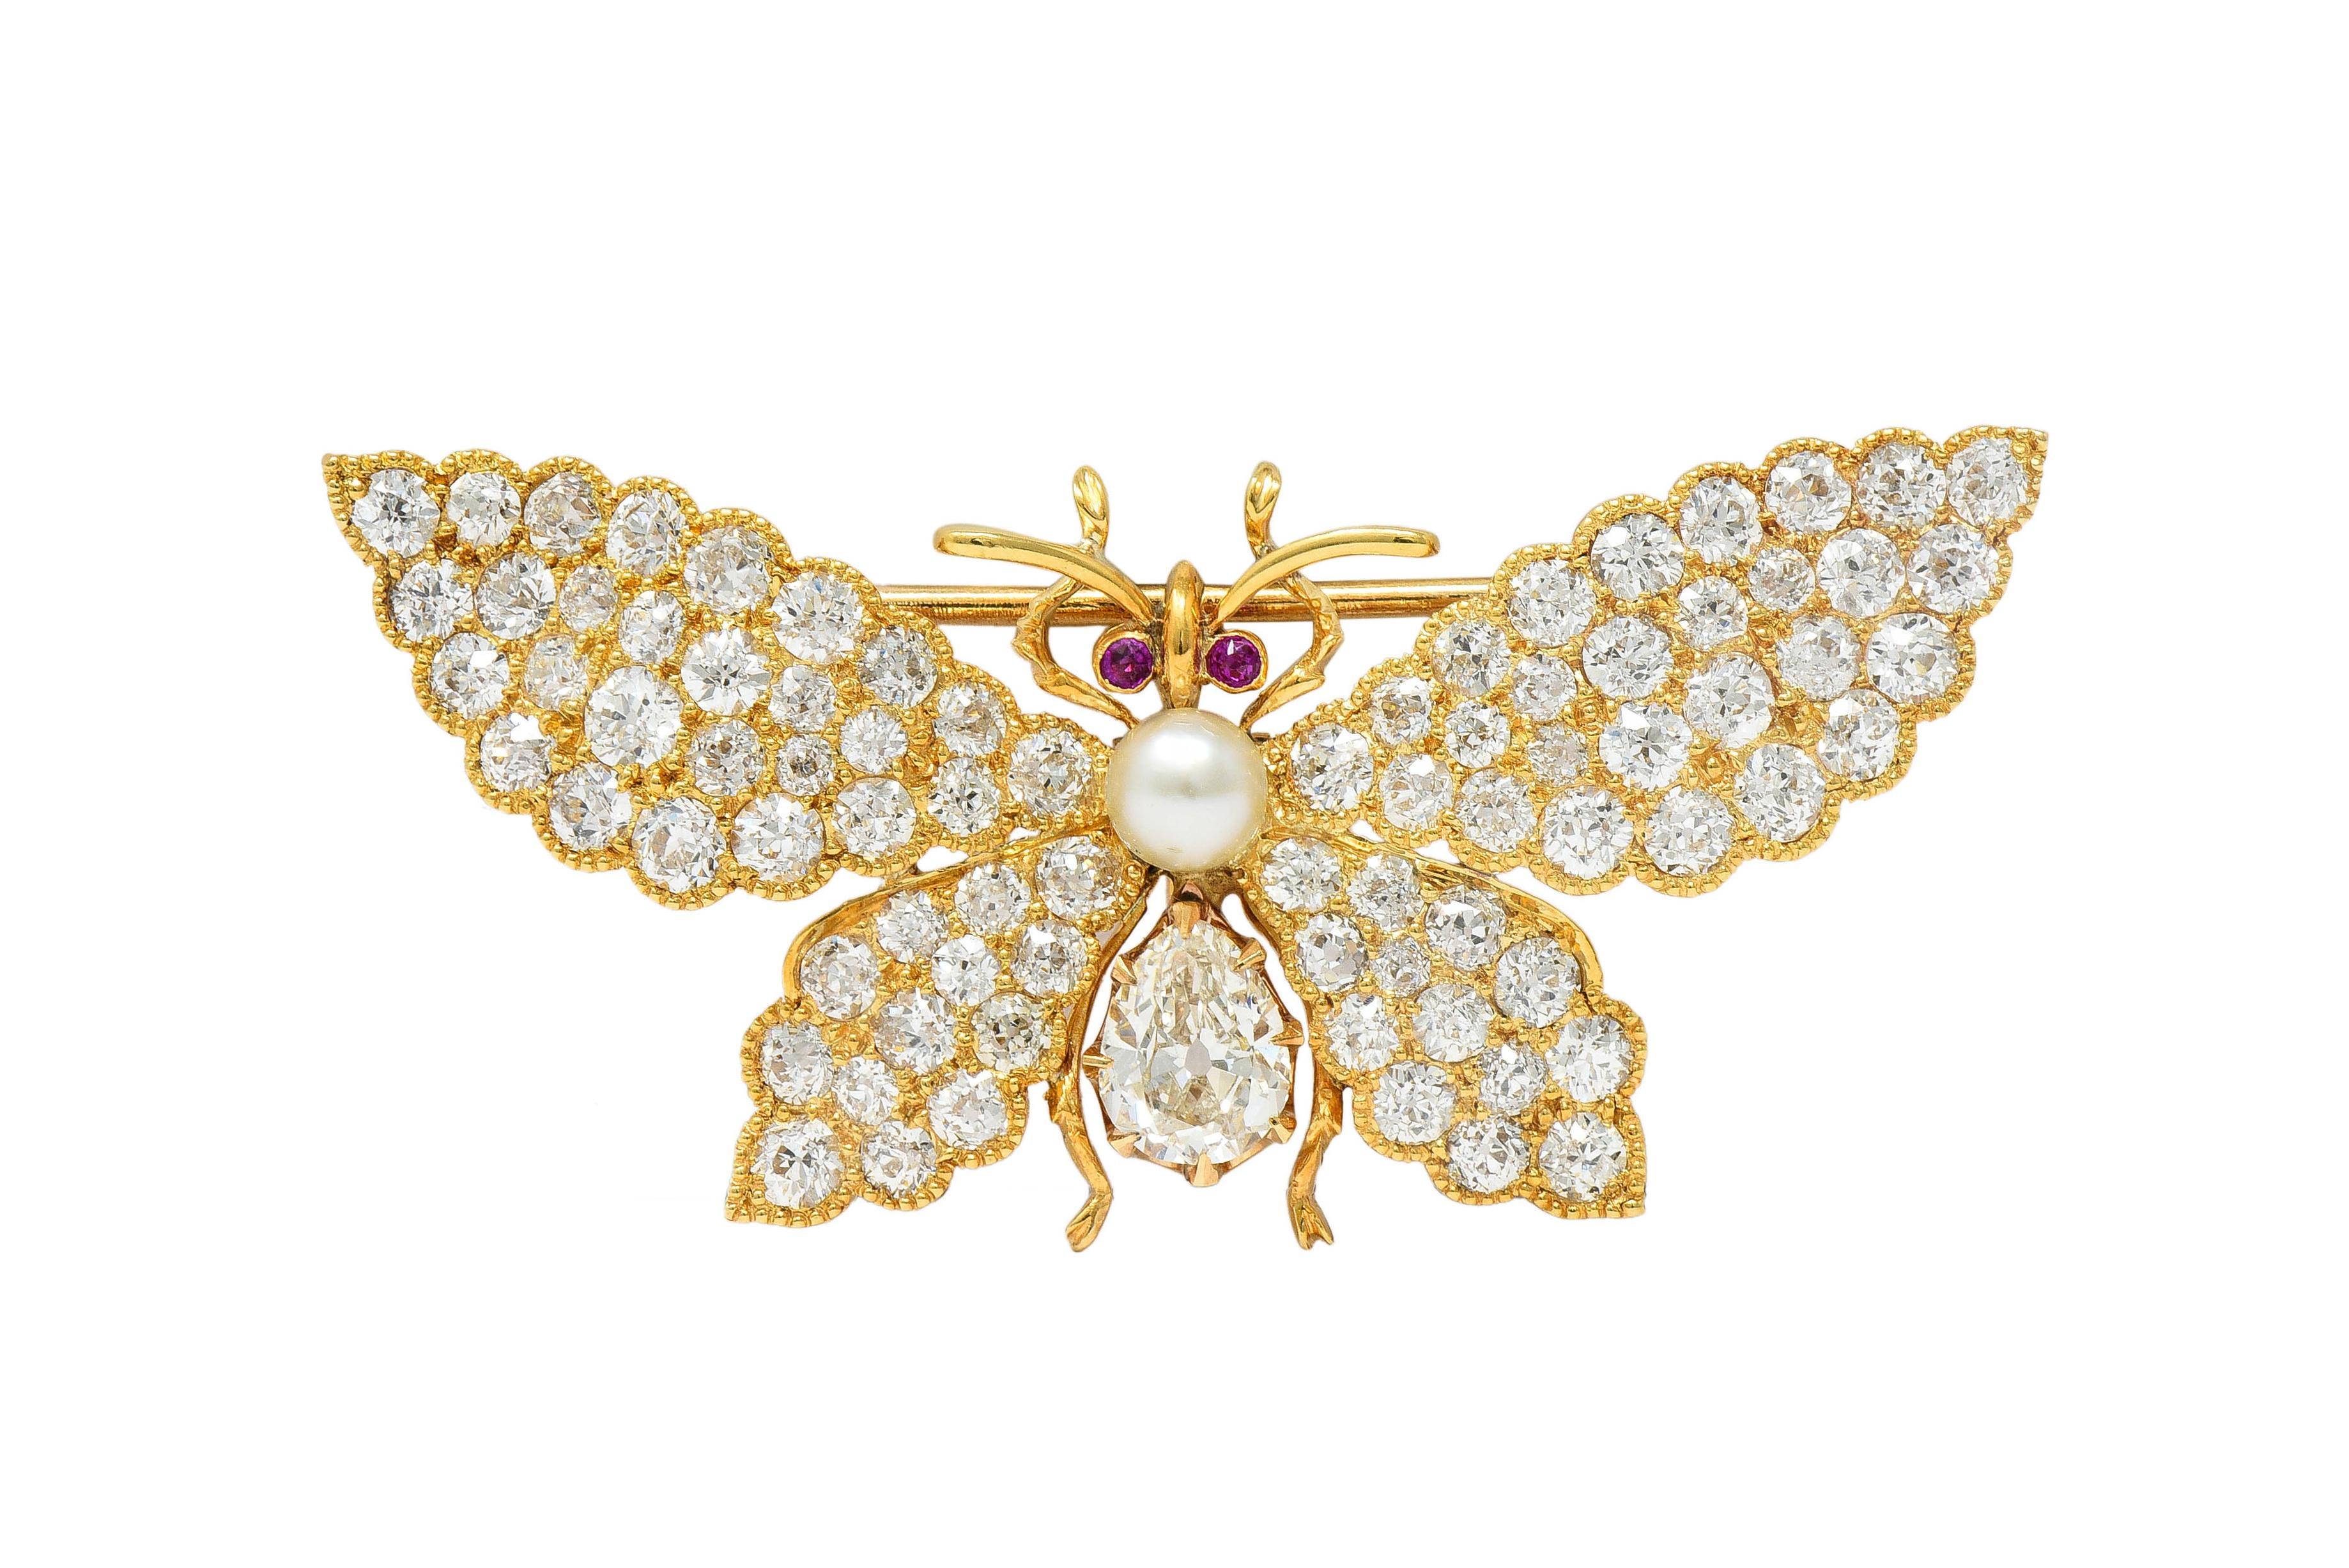 Designed as a stylized butterfly with scalloped wings, curling antennae, and spindly legs 
Featuring a pear cut diamond prong set as lower body weighing approximately 0.65 carat
I color with VS2 clarity - set below a 4.0 mm round pearl as the torso